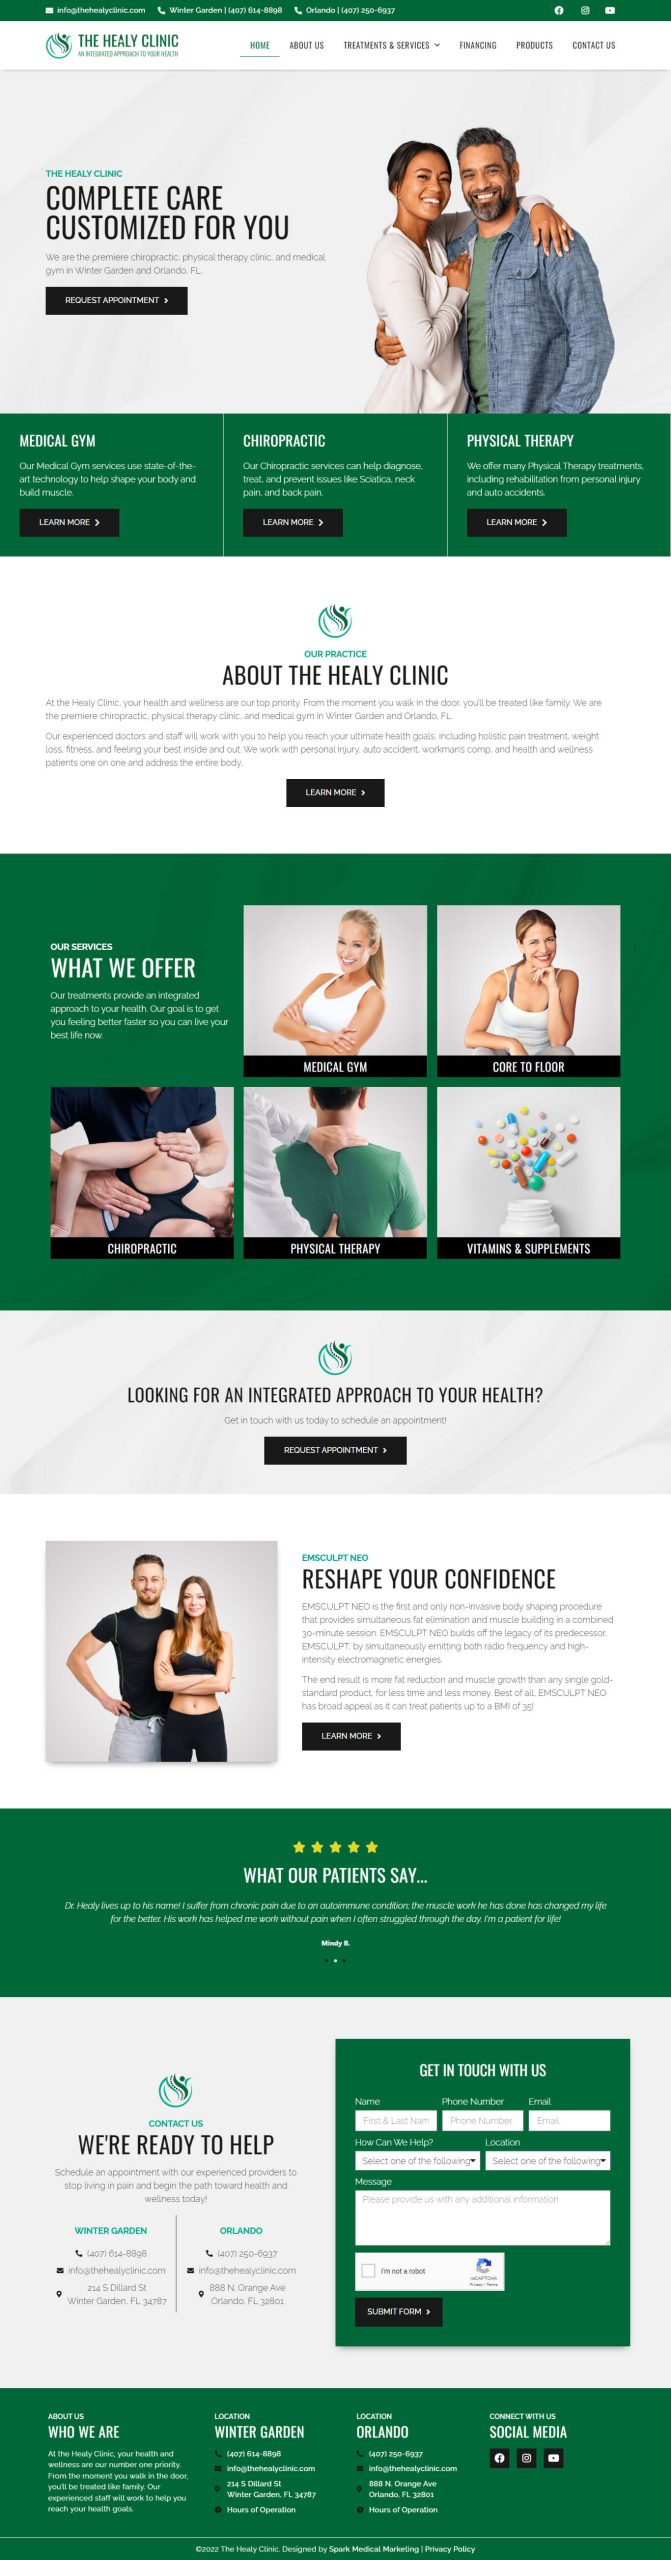 The Healy Clinic Homepage